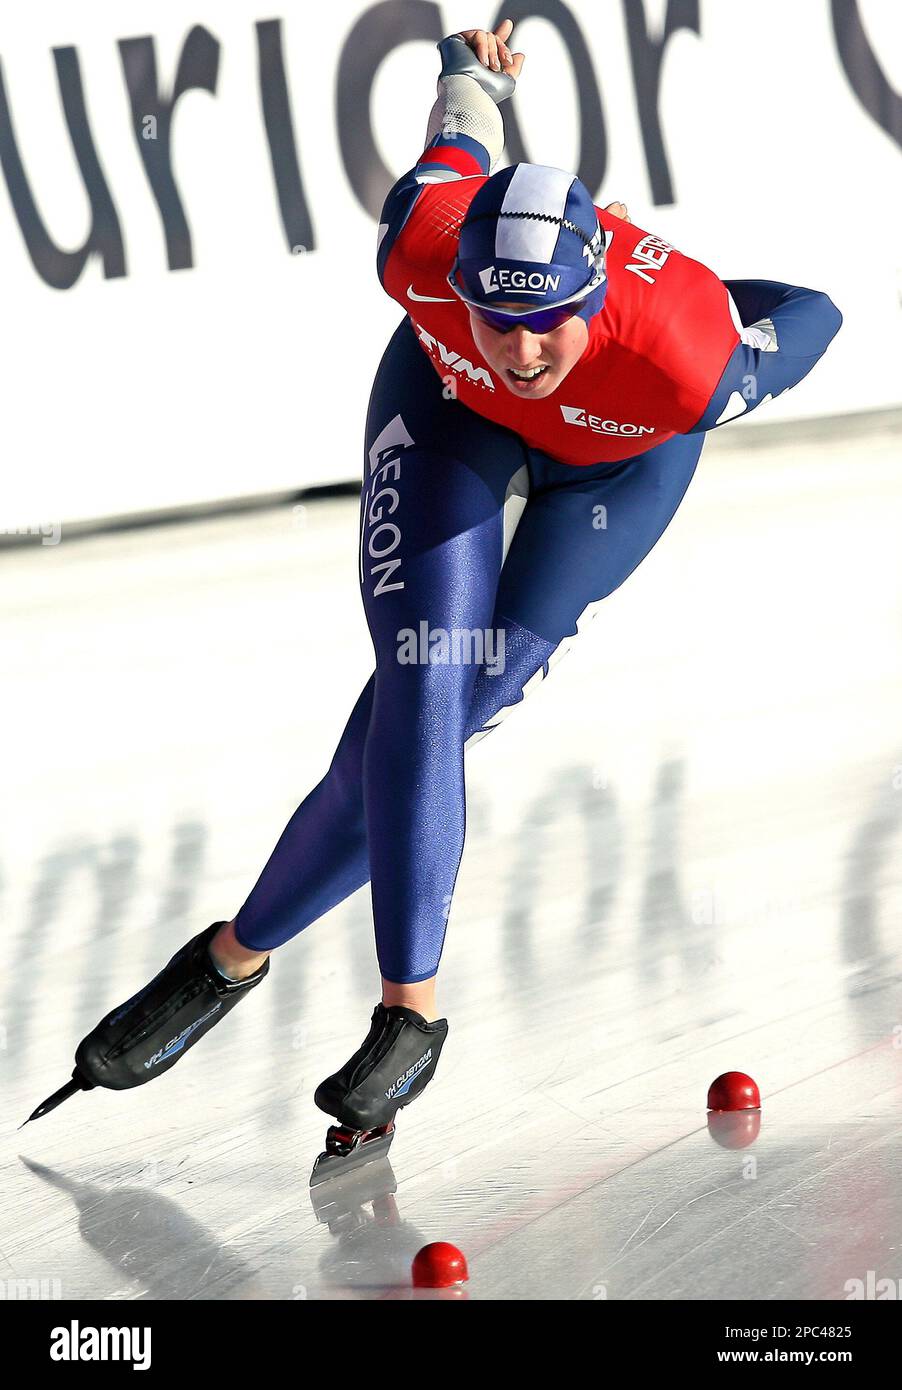 The Netherlands' Renate Groenewold skates in the women's 3,000-meter  speedskating World Cup race Sunday, Nov. 11, 2007, at the Utah Olympic Oval  in Kearns, Utah. She finished in third place. (AP Photo/Douglas